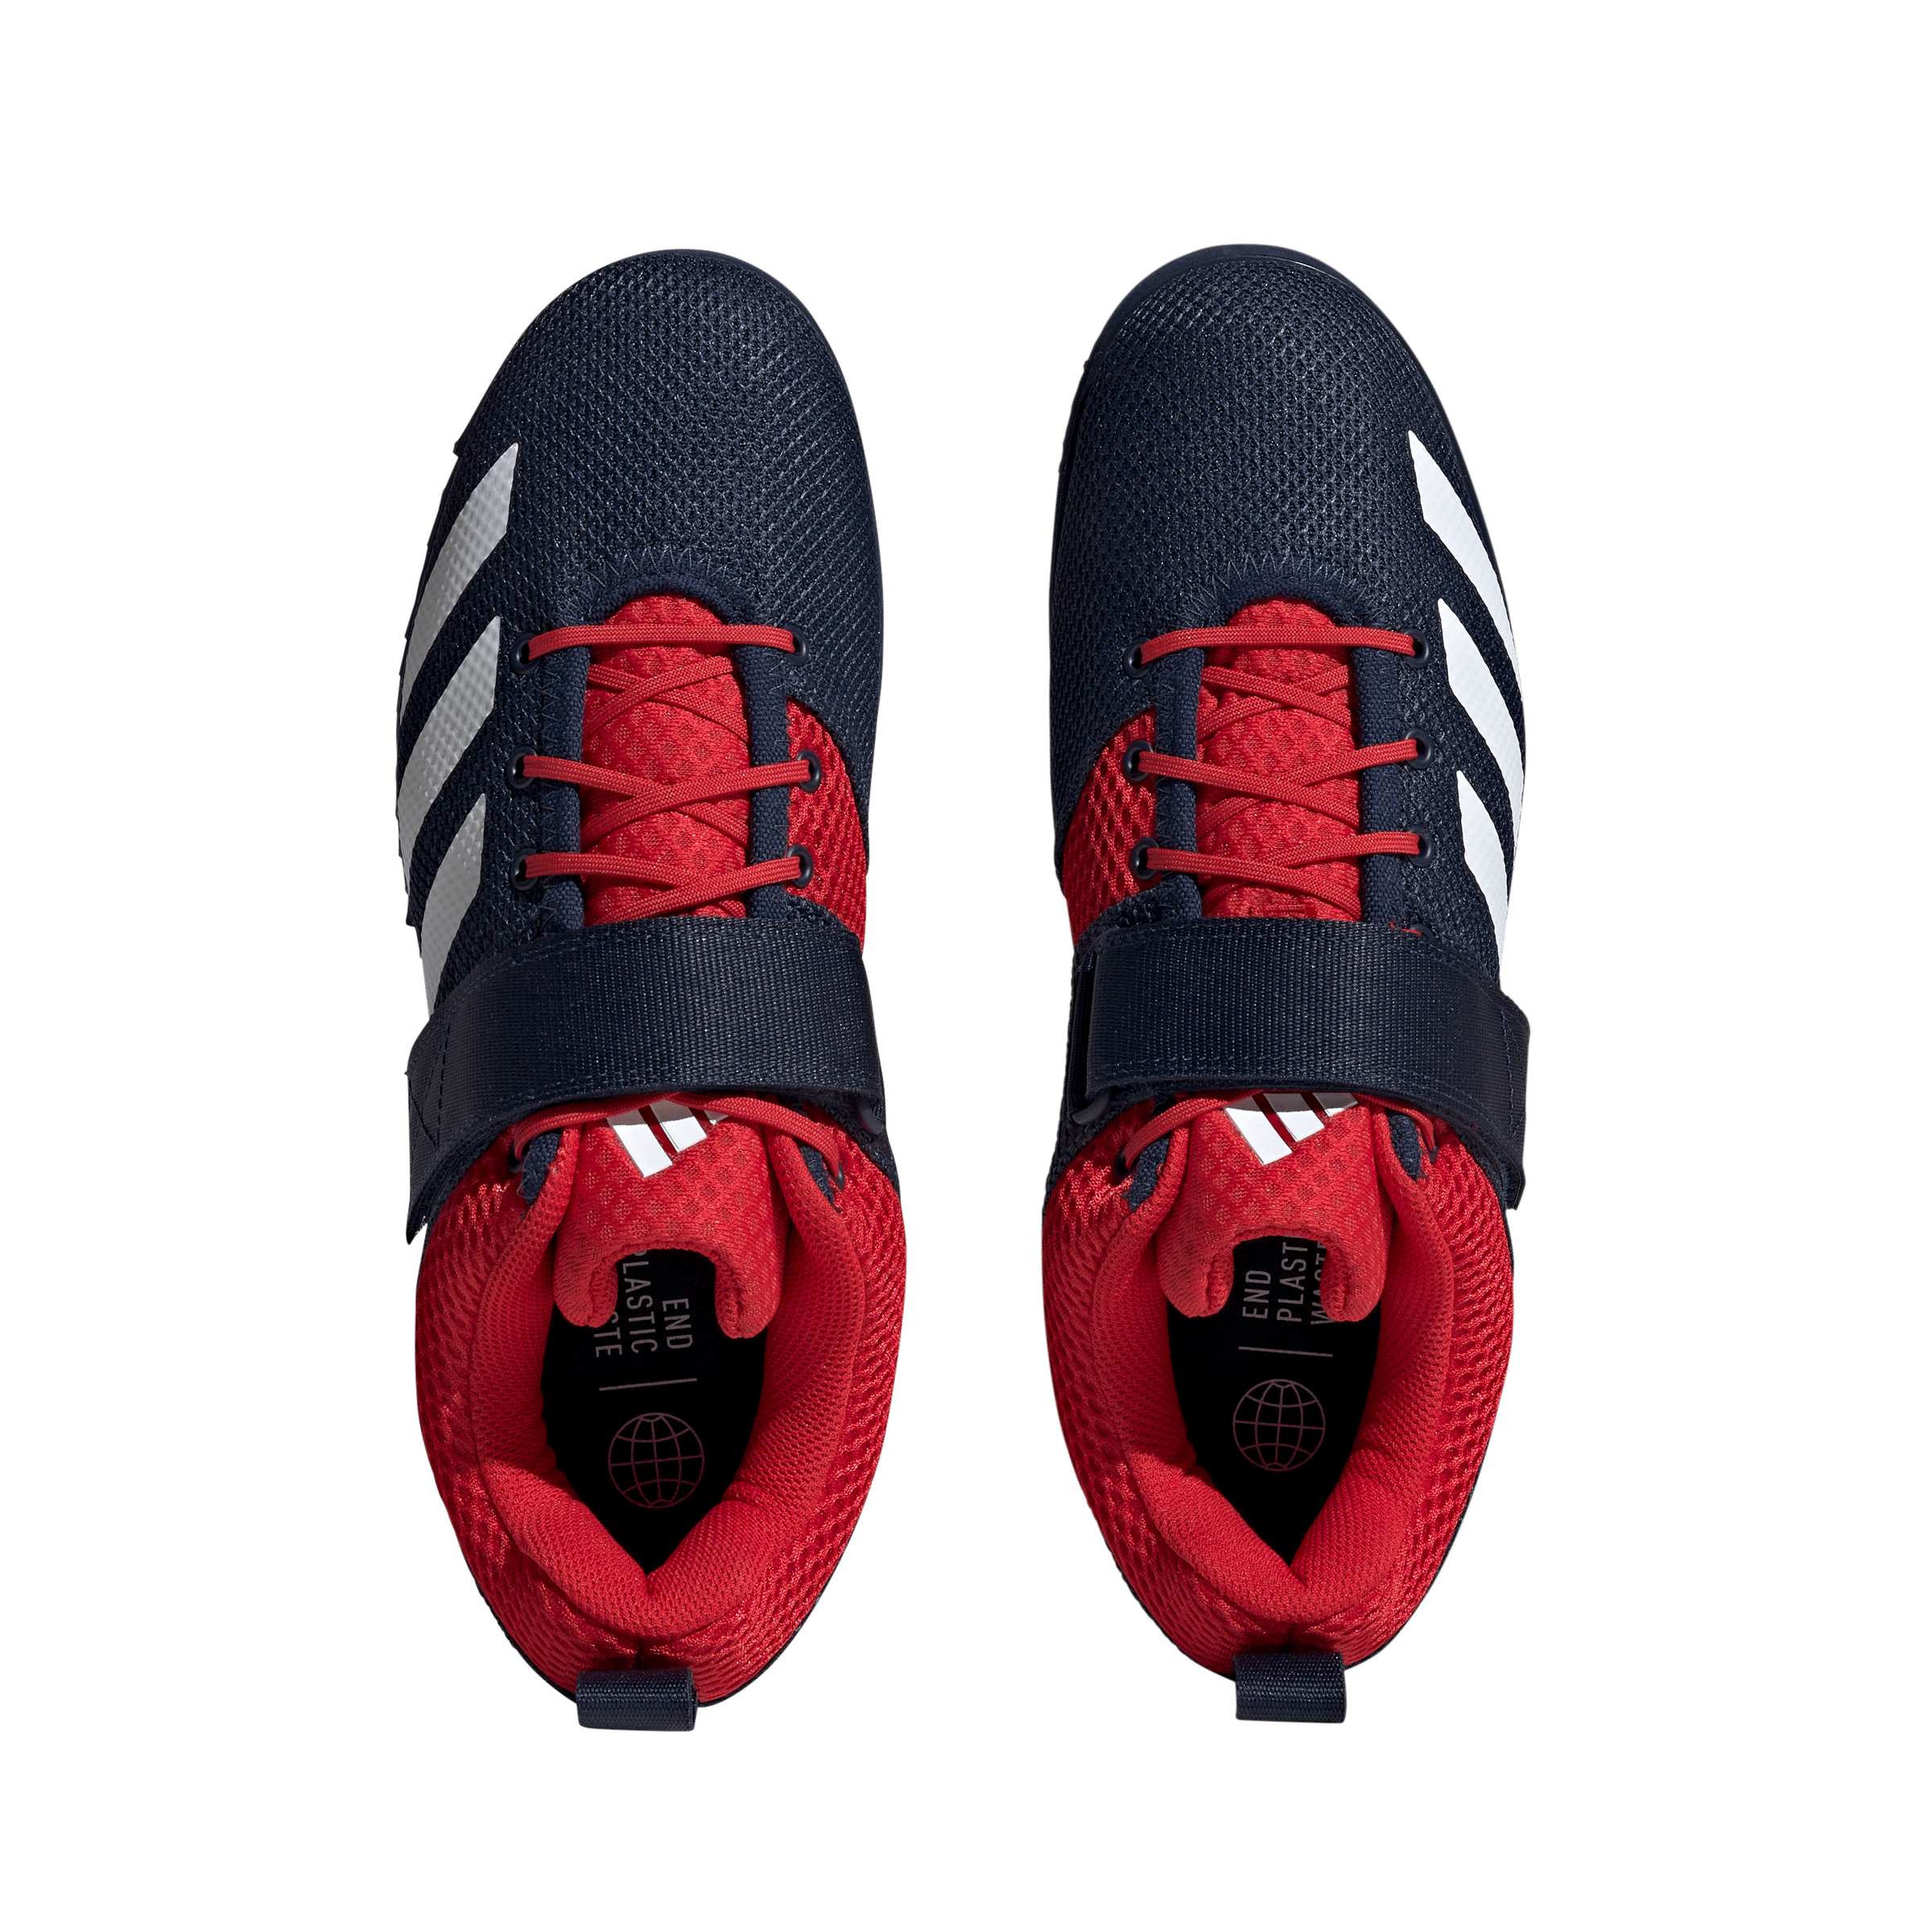 Adidas Powerlift 5 Lifting Shoes in Navy - WIT Fitness